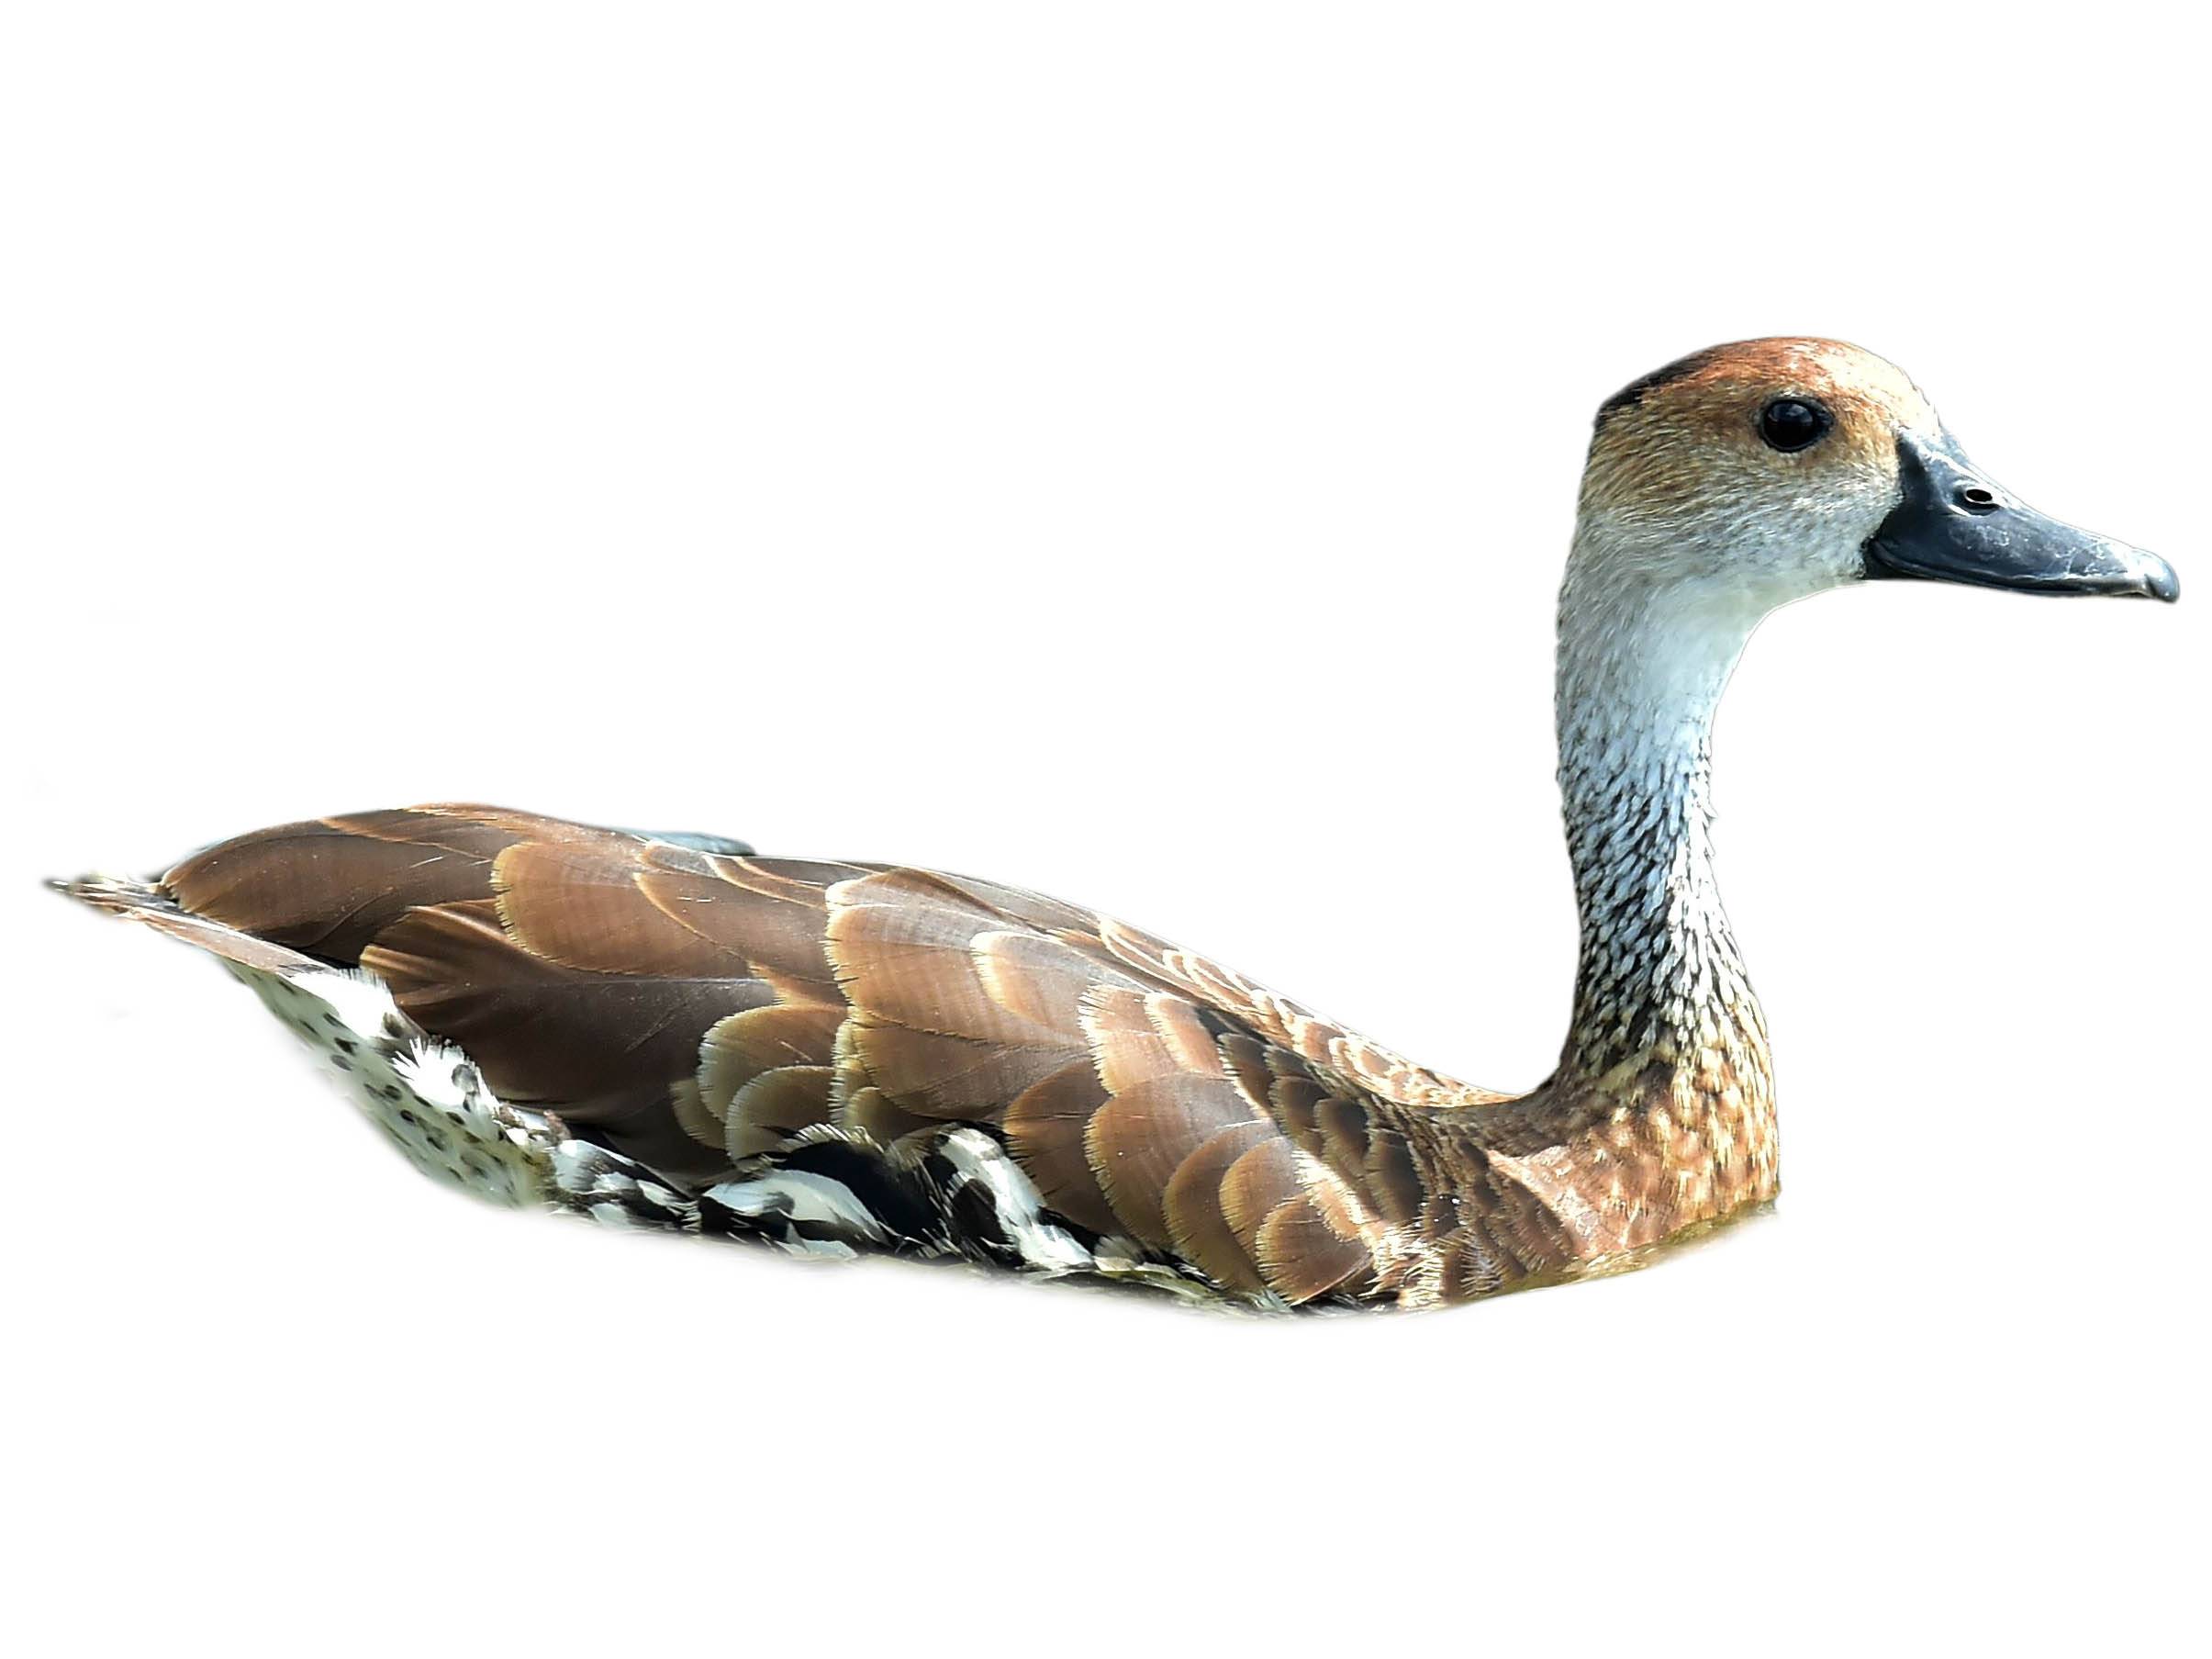 A photo of a West Indian Whistling Duck (Dendrocygna arborea)